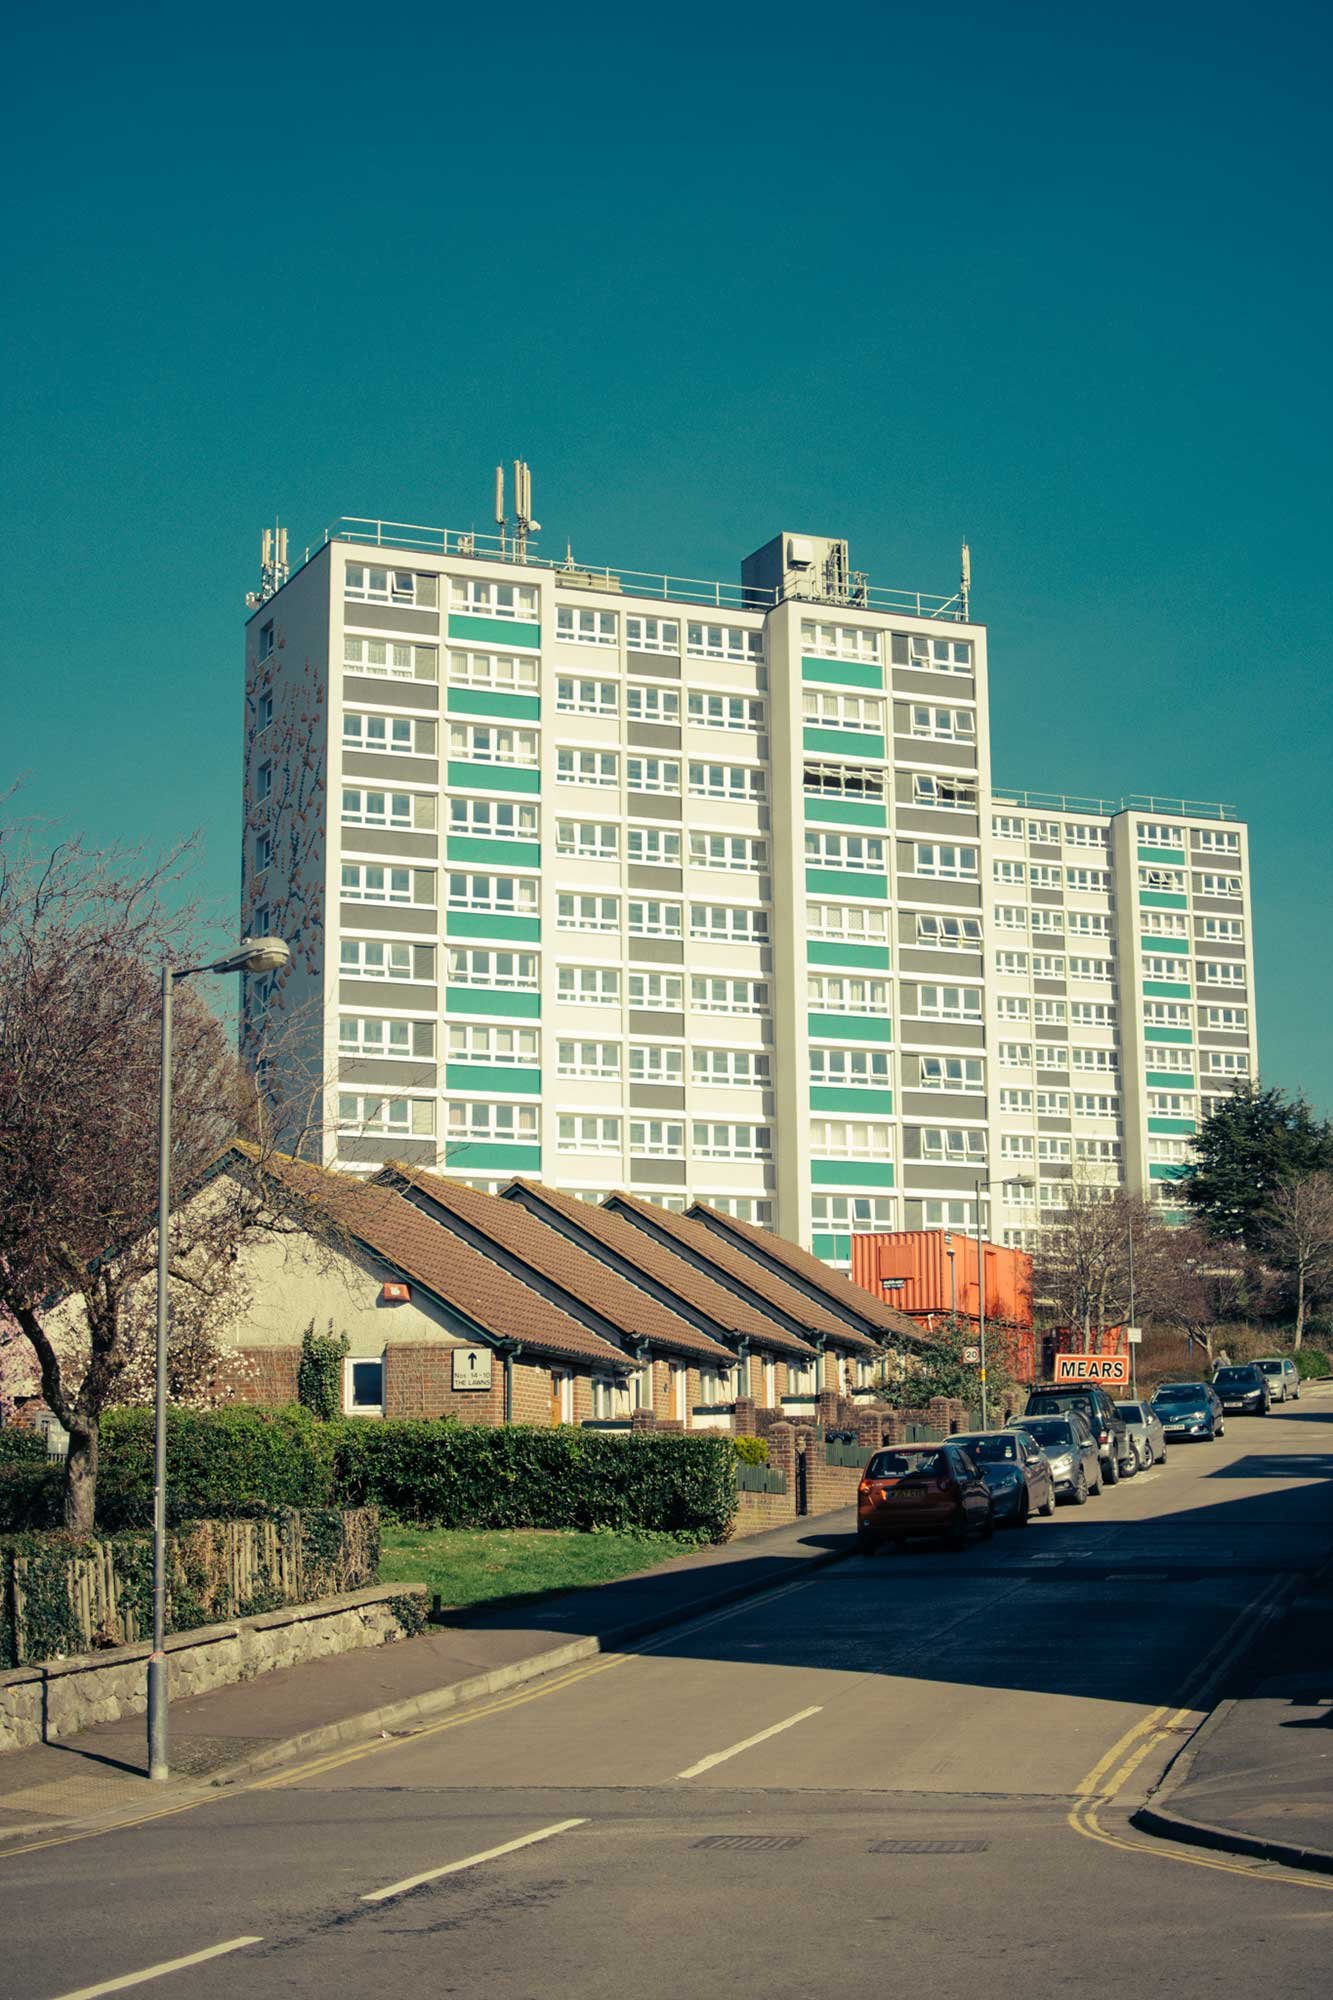 Tower block and bungalows